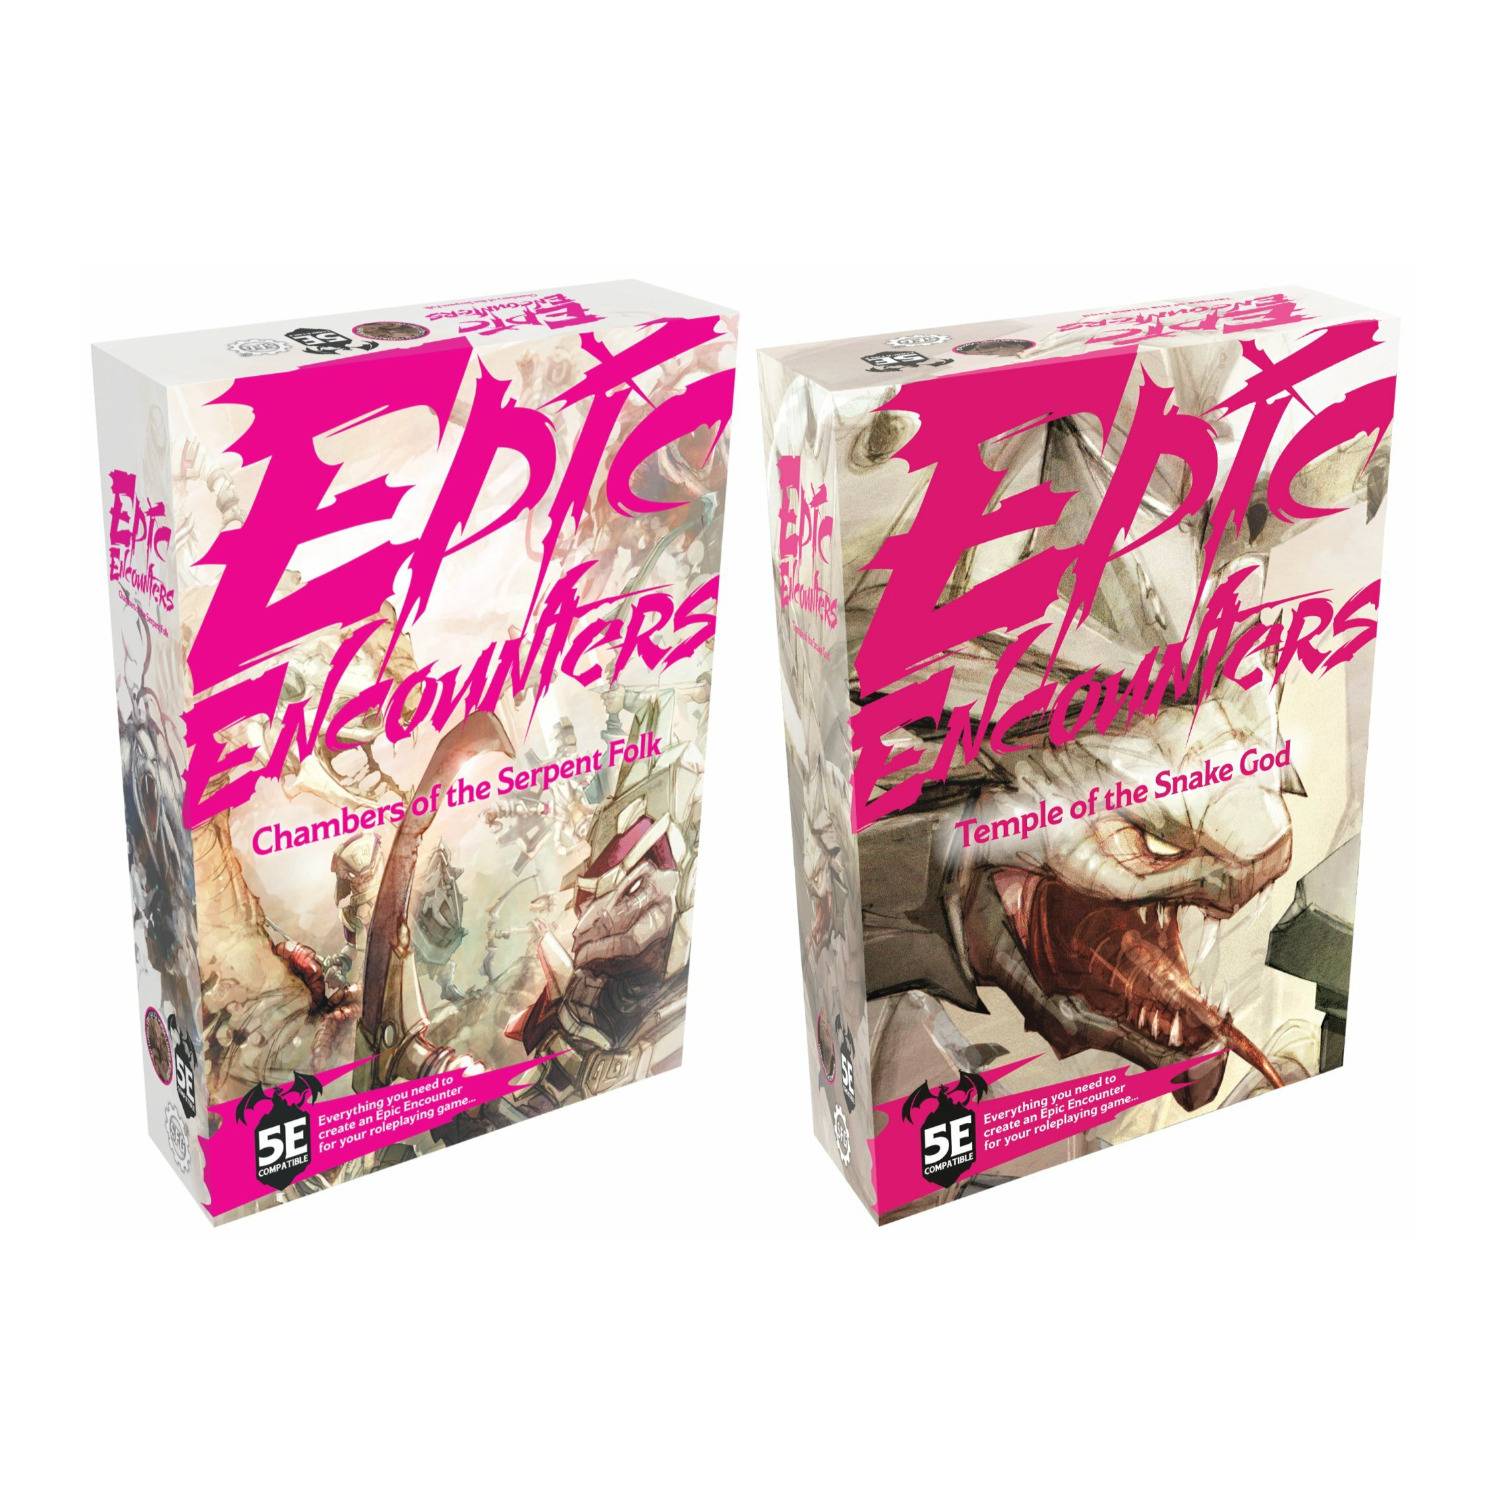 Epic Encounters Temple of The Snake God and Chambers of The Serpant Folk Bundle